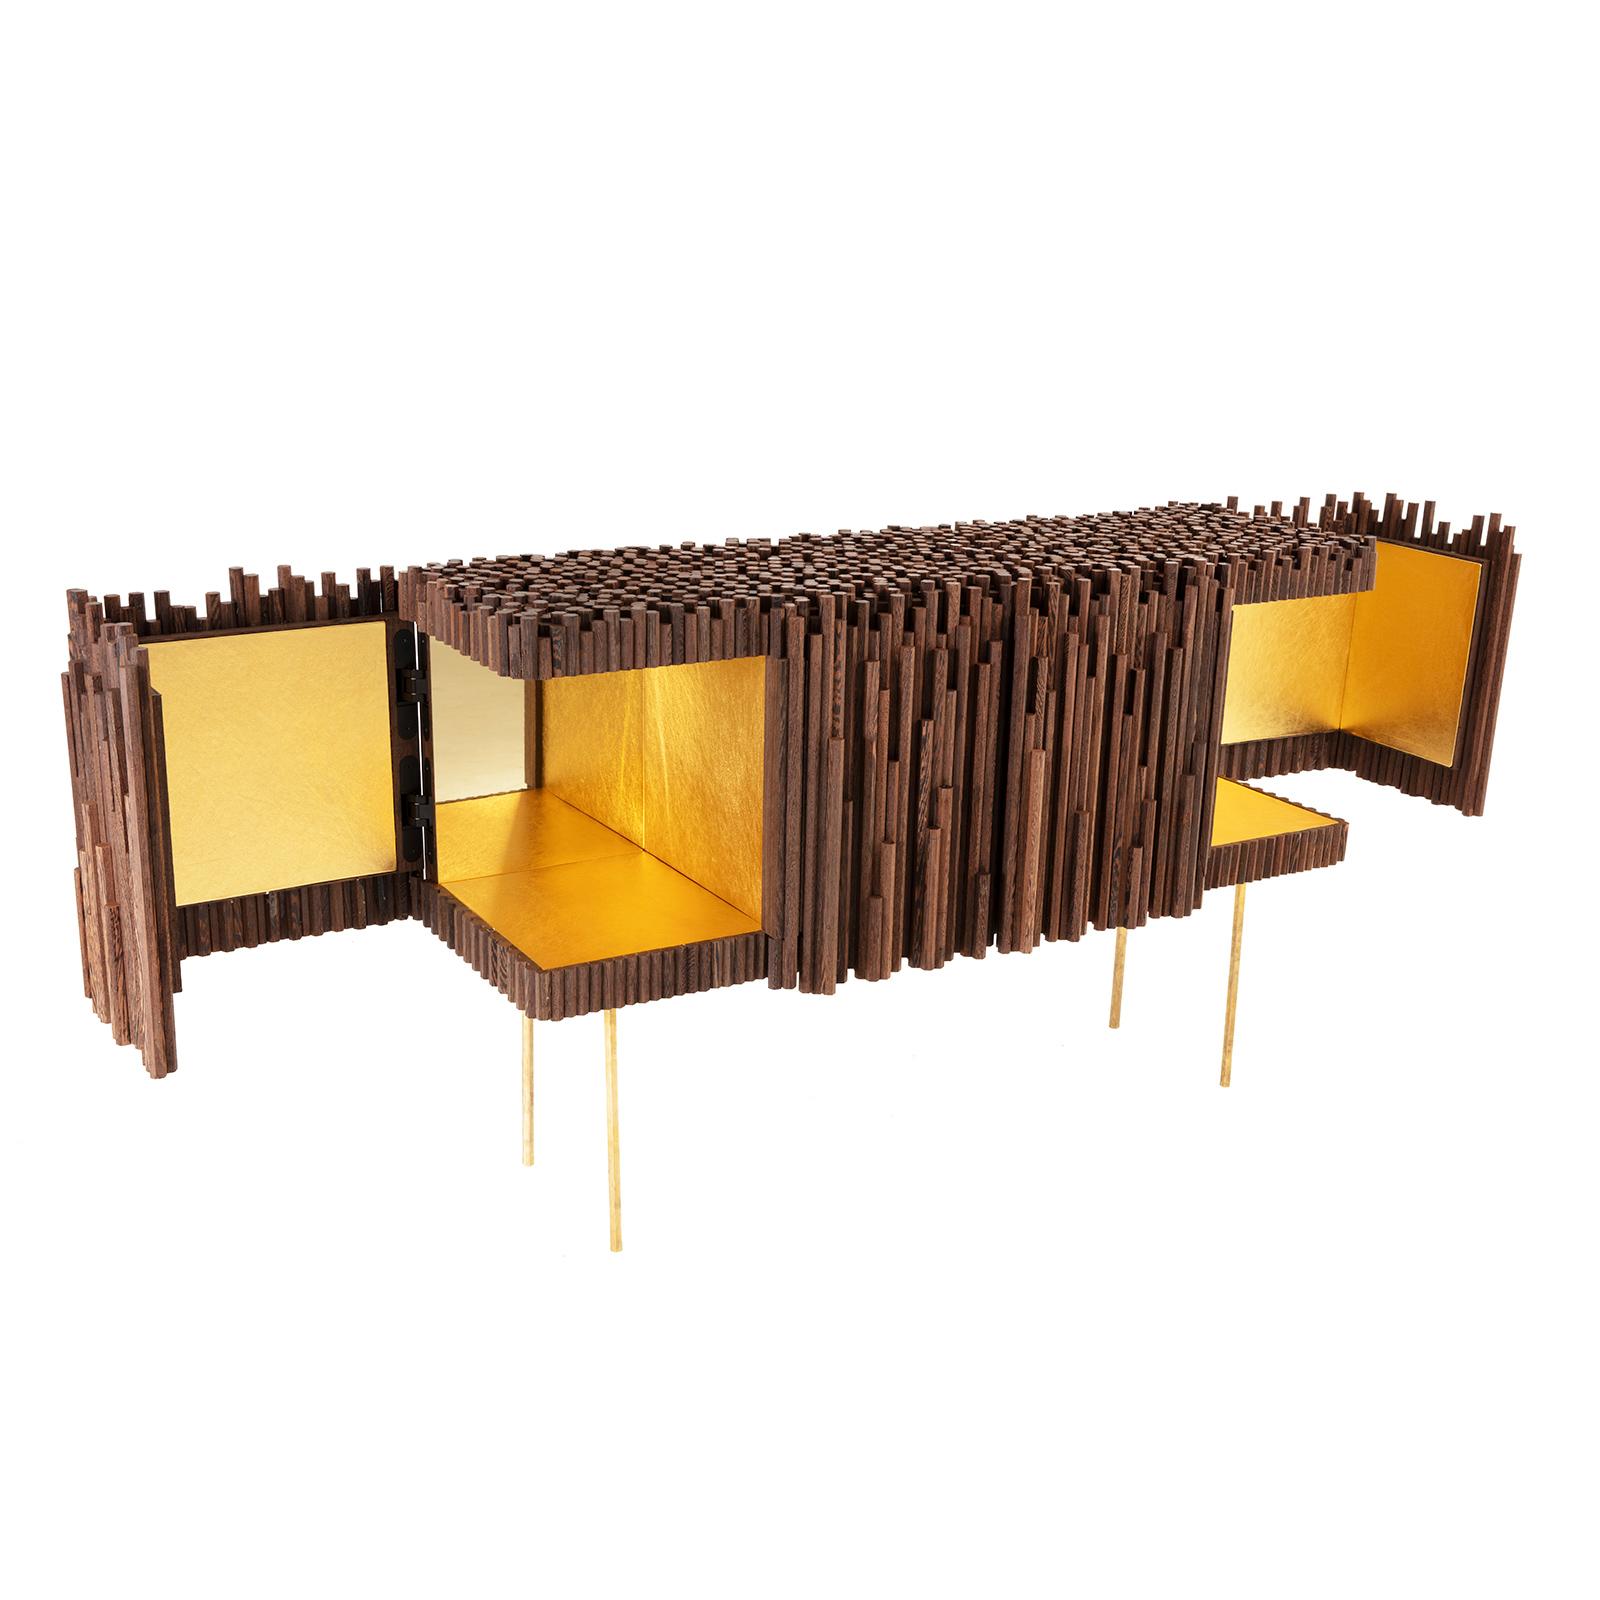 Mauritian Rossana Orlandi Rochester Sideboard in Wenge by Francesco Messina for Cypraea For Sale